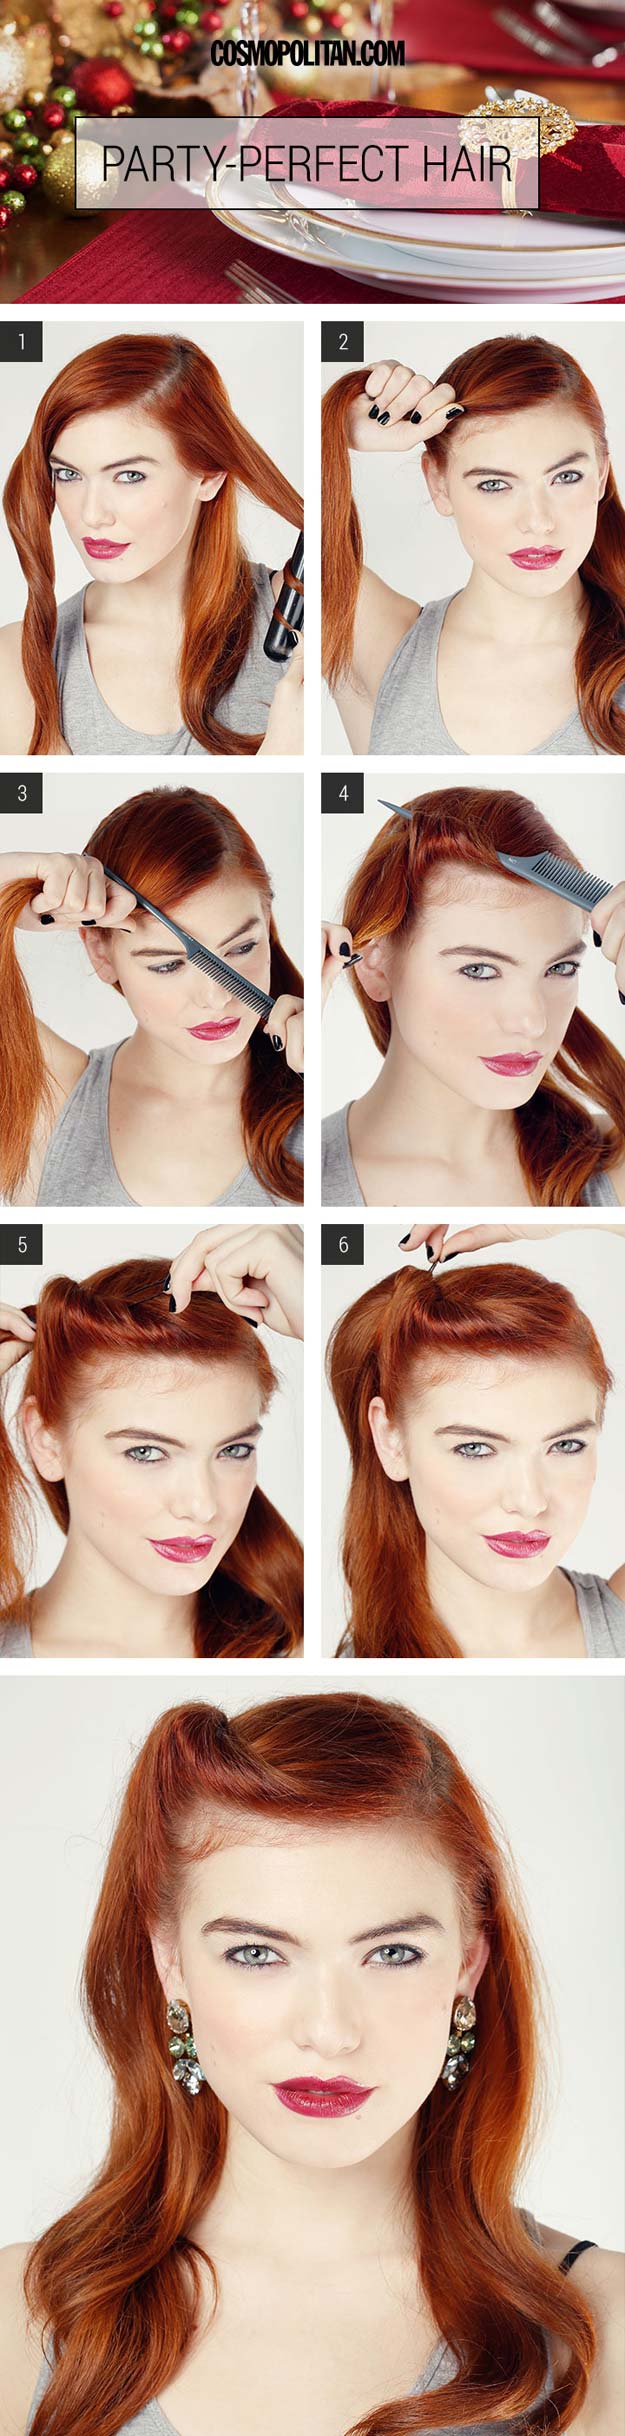 Cool and Easy DIY Hairstyles - Party-Perfect Glam Roll - Quick and Easy Ideas for Back to School Styles for Medium, Short and Long Hair - Fun Tips and Best Step by Step Tutorials for Teens, Prom, Weddings, Special Occasions and Work. Up dos, Braids, Top Knots and Buns, Super Summer Looks #hairstyles #hair #teens #easyhairstyles #diy #beauty